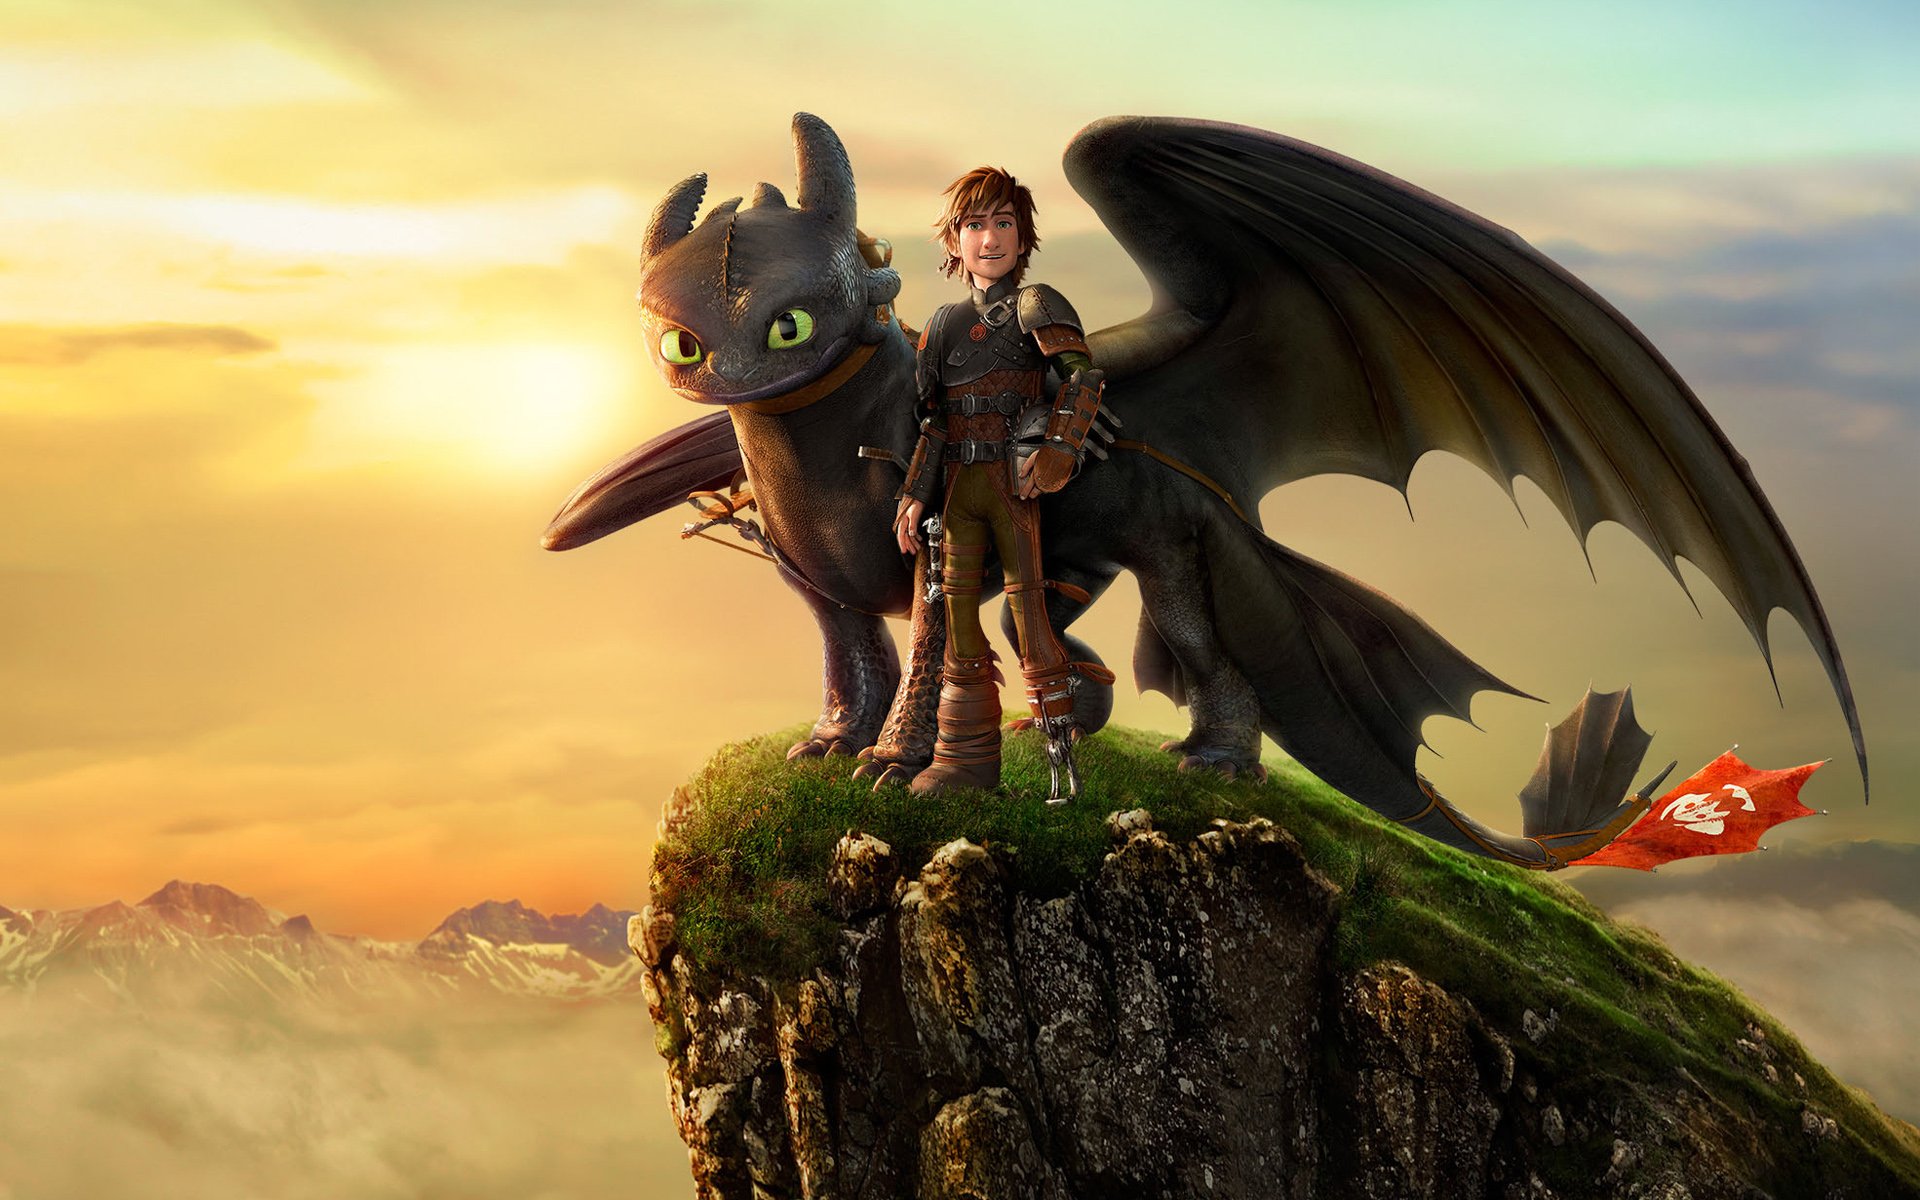 how_to_train_your_dragon_2_2014-wide